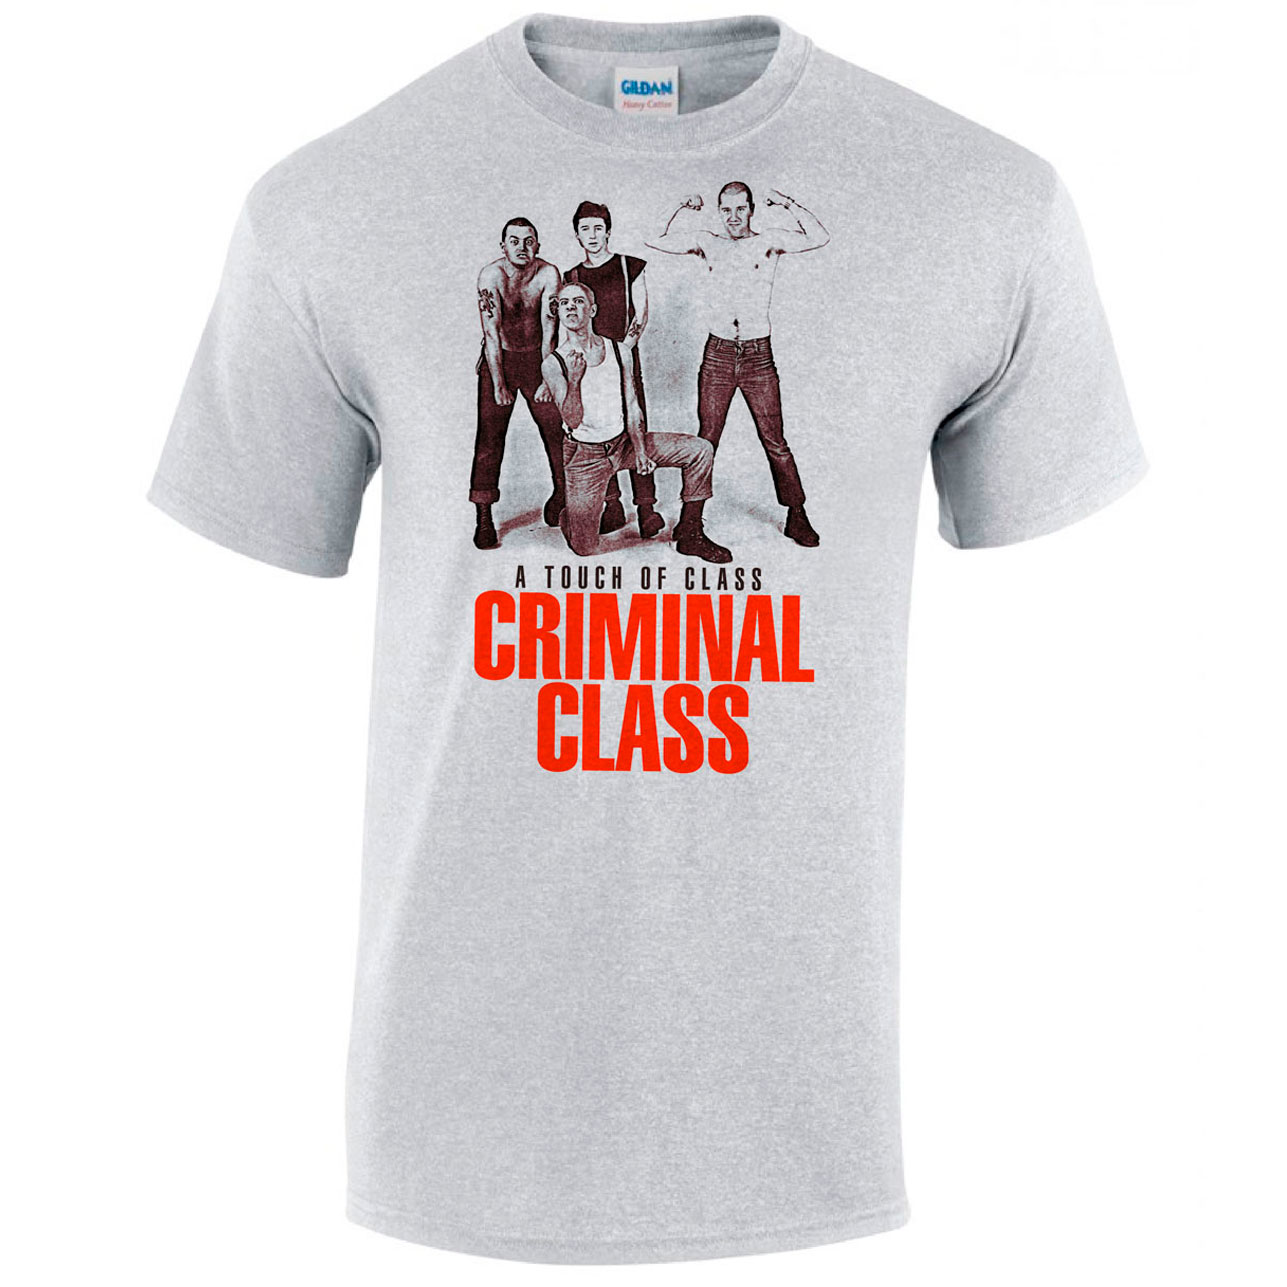 CRIMINAL CLASS A Touch of Class Grey Tshirt picture 1